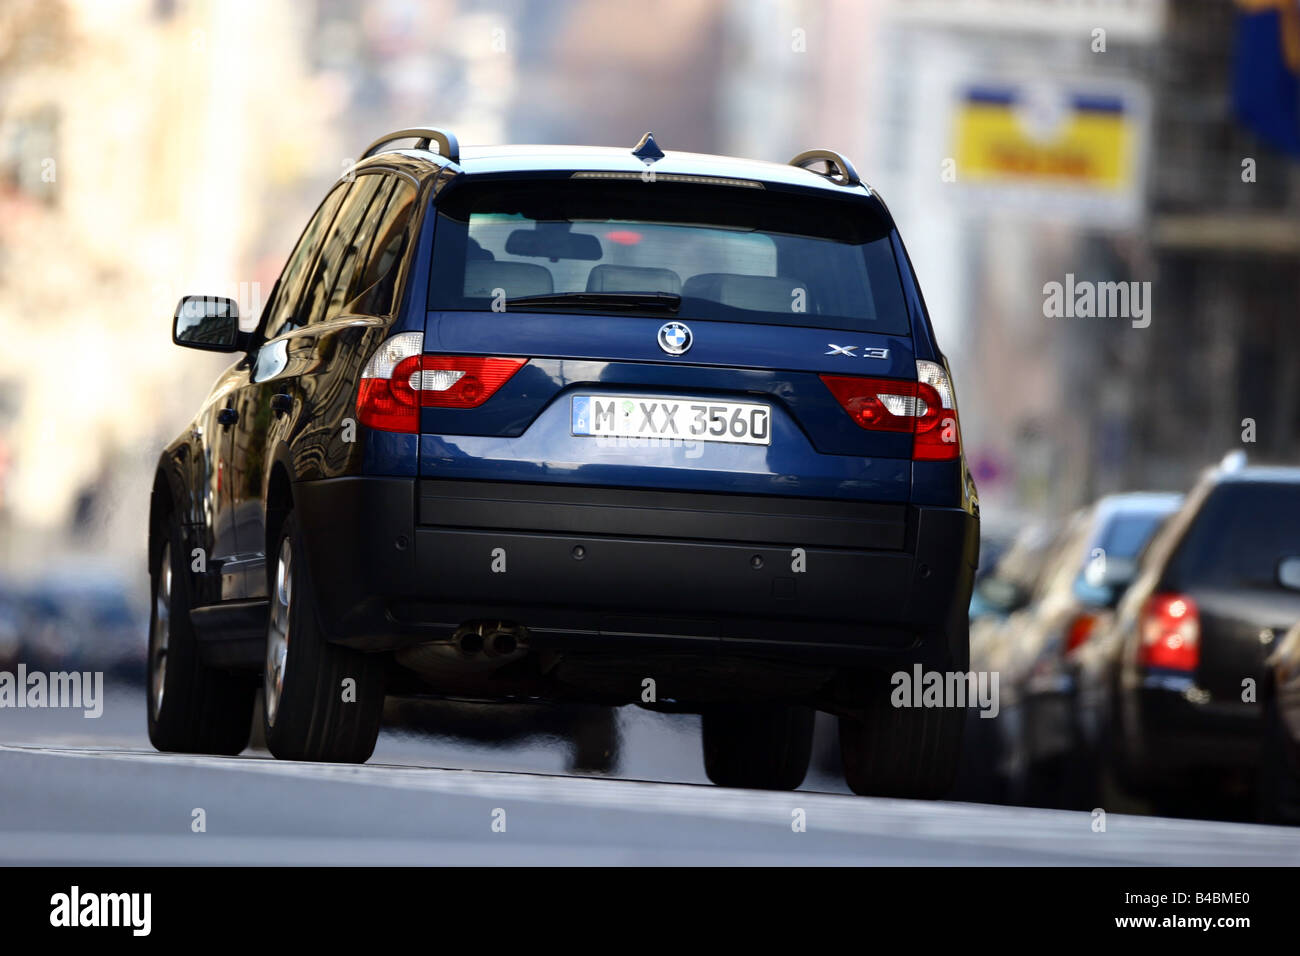 Car, BMW X3 3.0i, cross country vehicle, model year 2003-, dark blue, FGHDS, driving, diagonal from the back, rear view, City Stock Photo